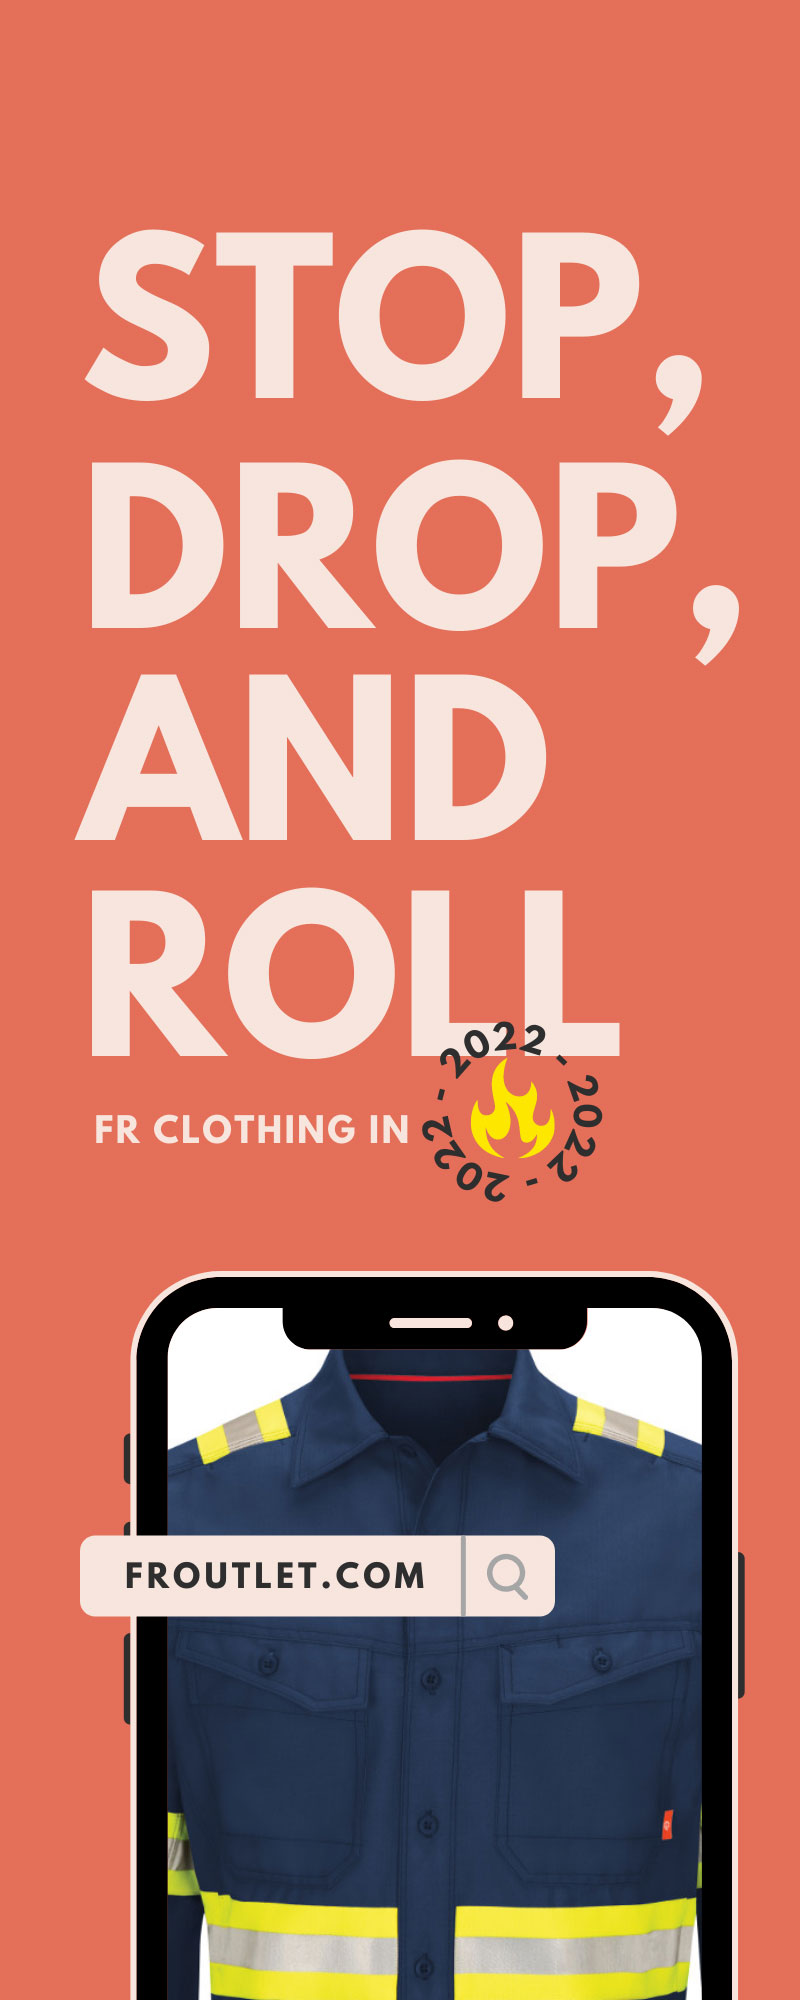 Stop, Drop, and Roll into FR Clothing in 2022